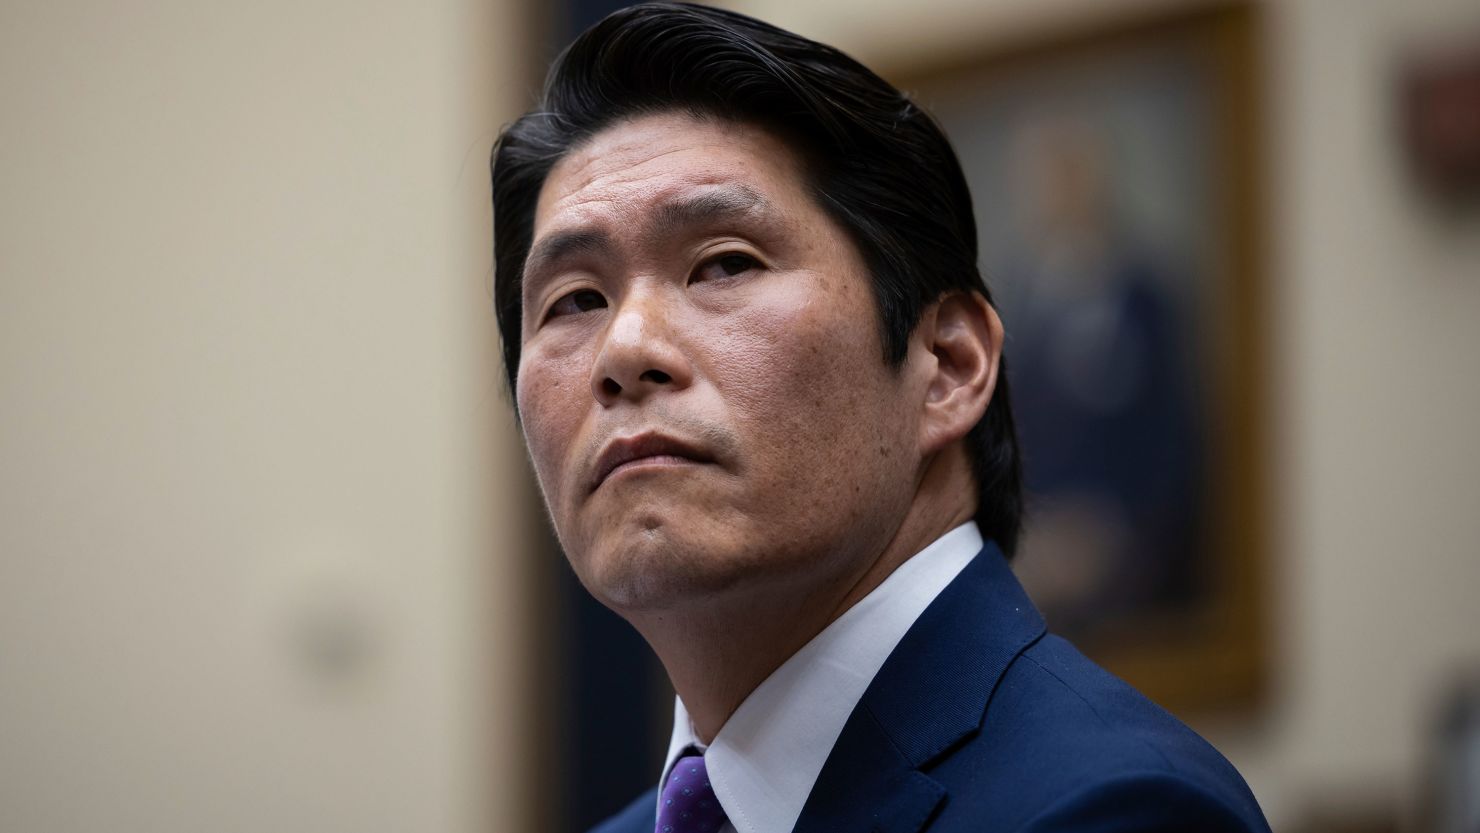 Department of Justice Special Counsel Robert Hur testifies before the House Judiciary Committee about his report on President Joe Biden's mishandling of classified documents on Capitol Hill on March 12, 2024.